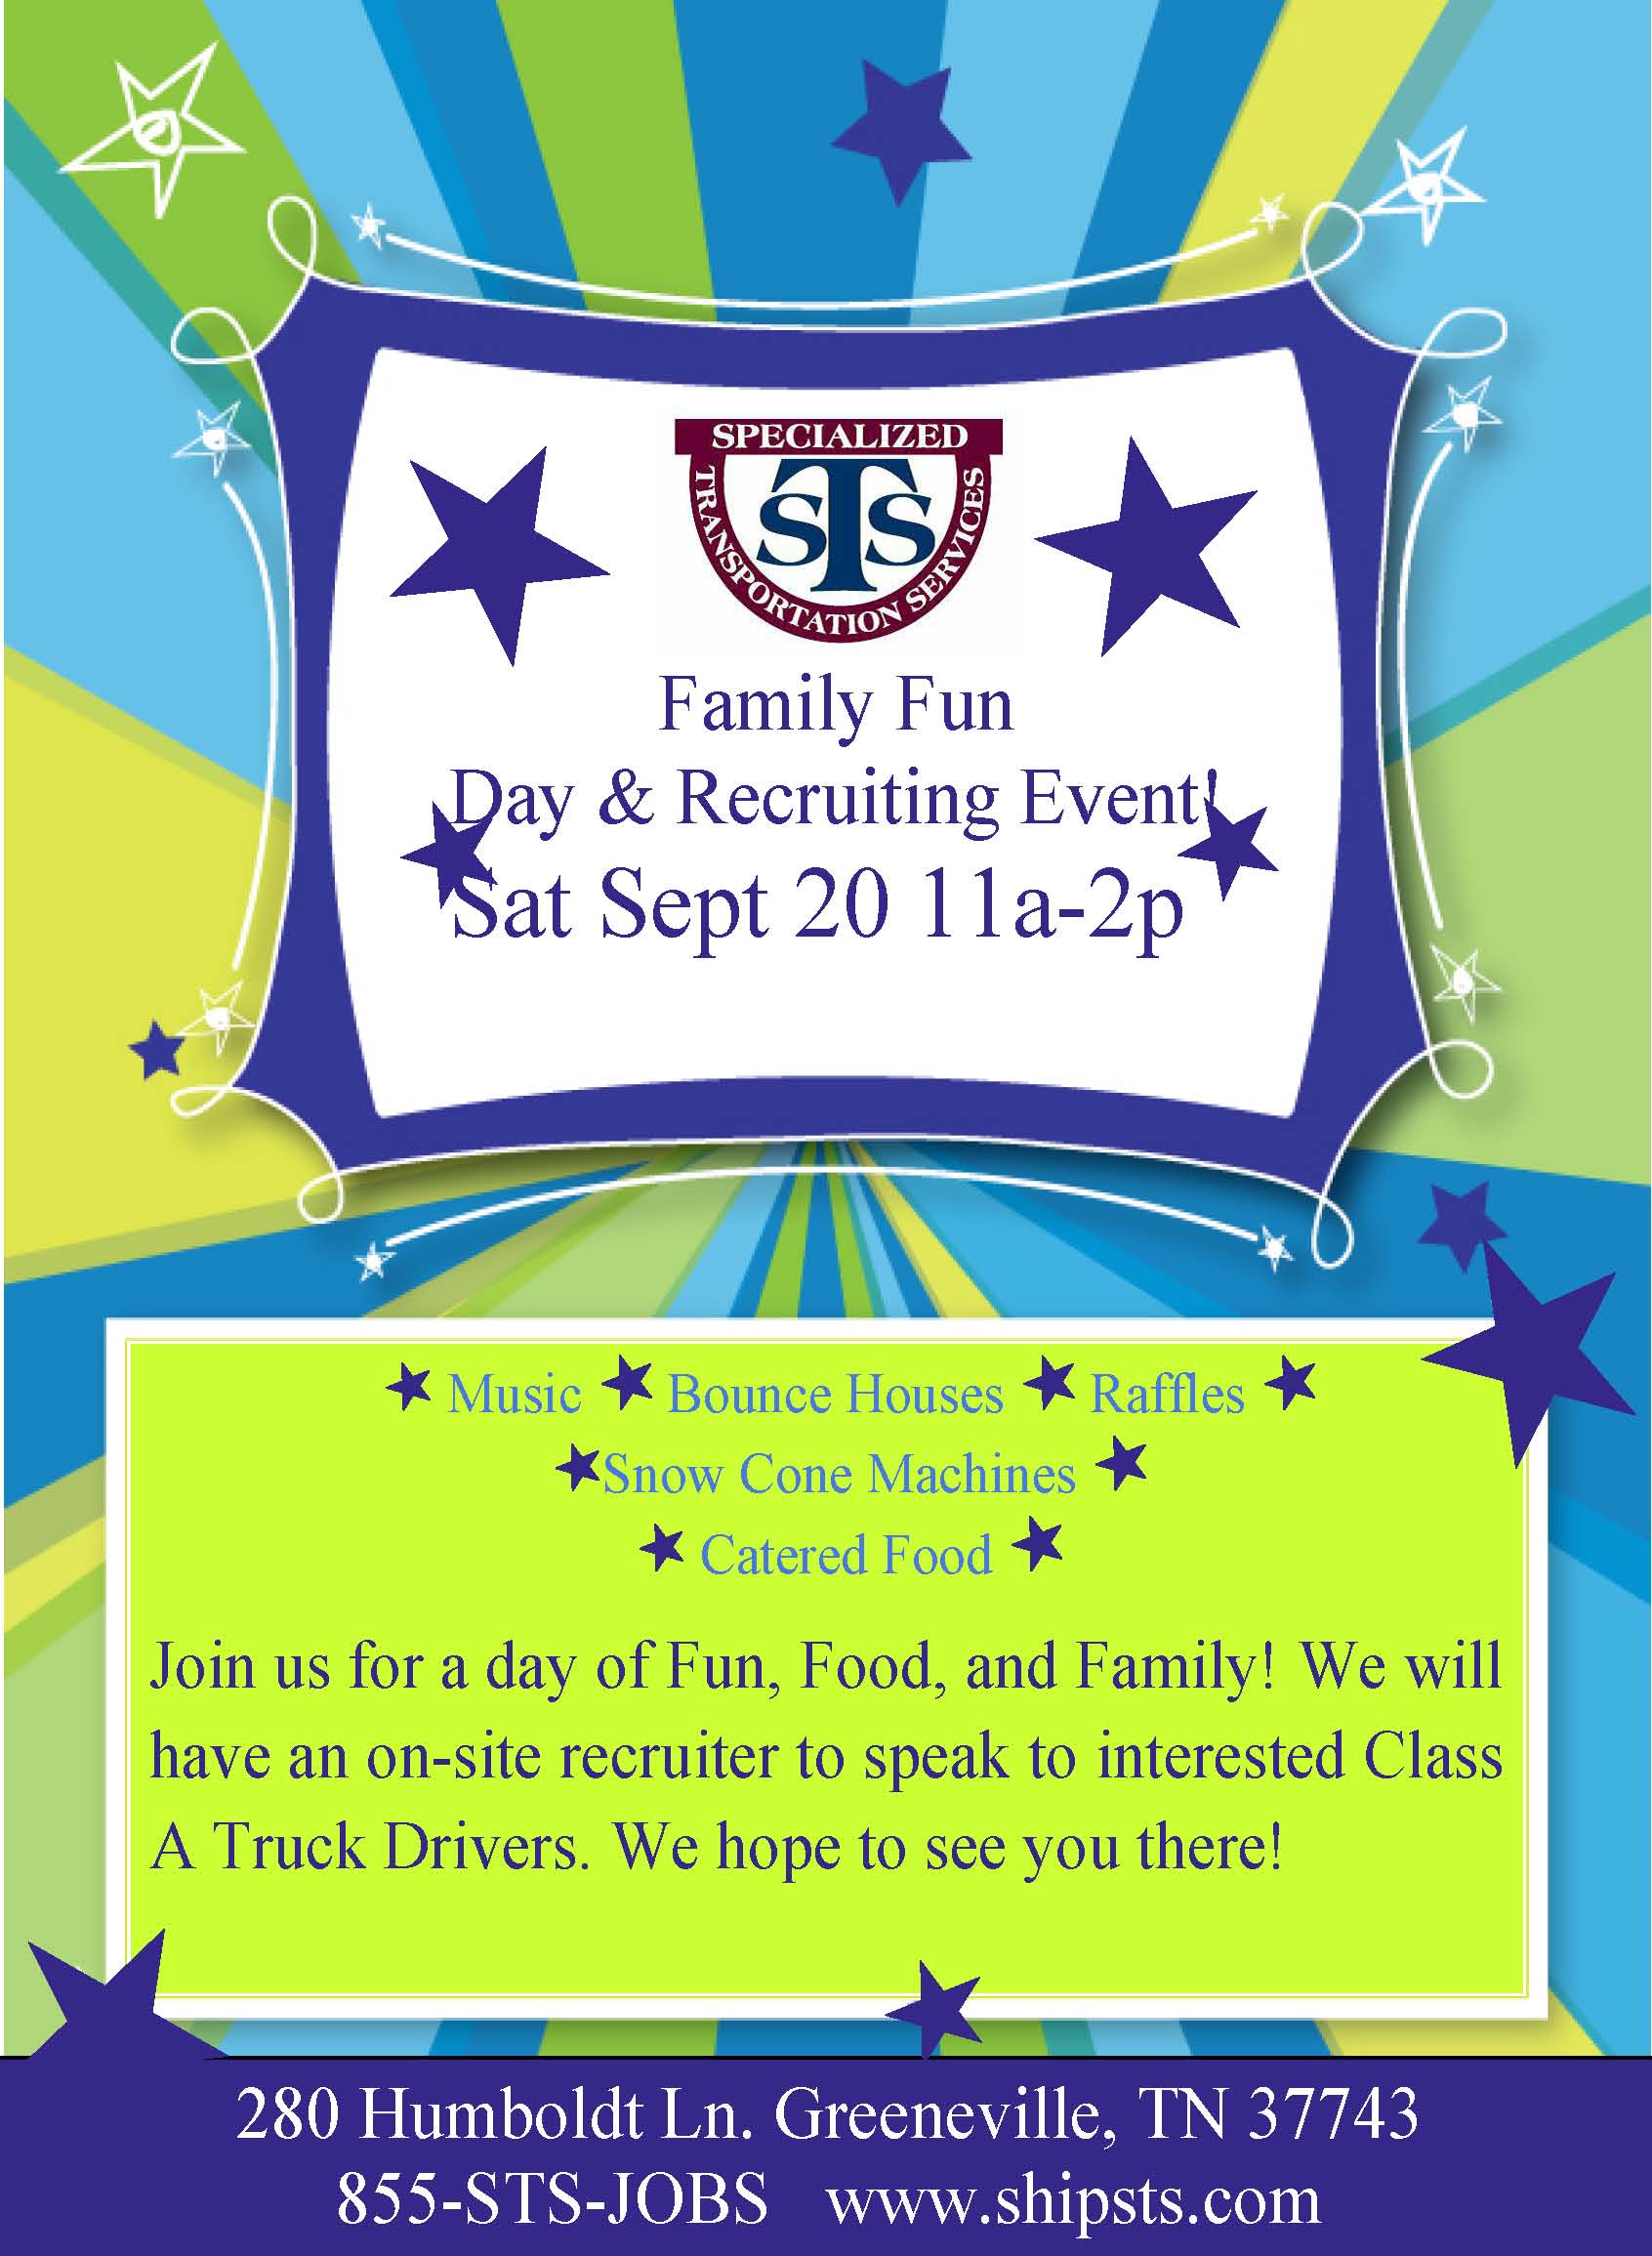 Greeneville TN Family Day and Recruiting Event